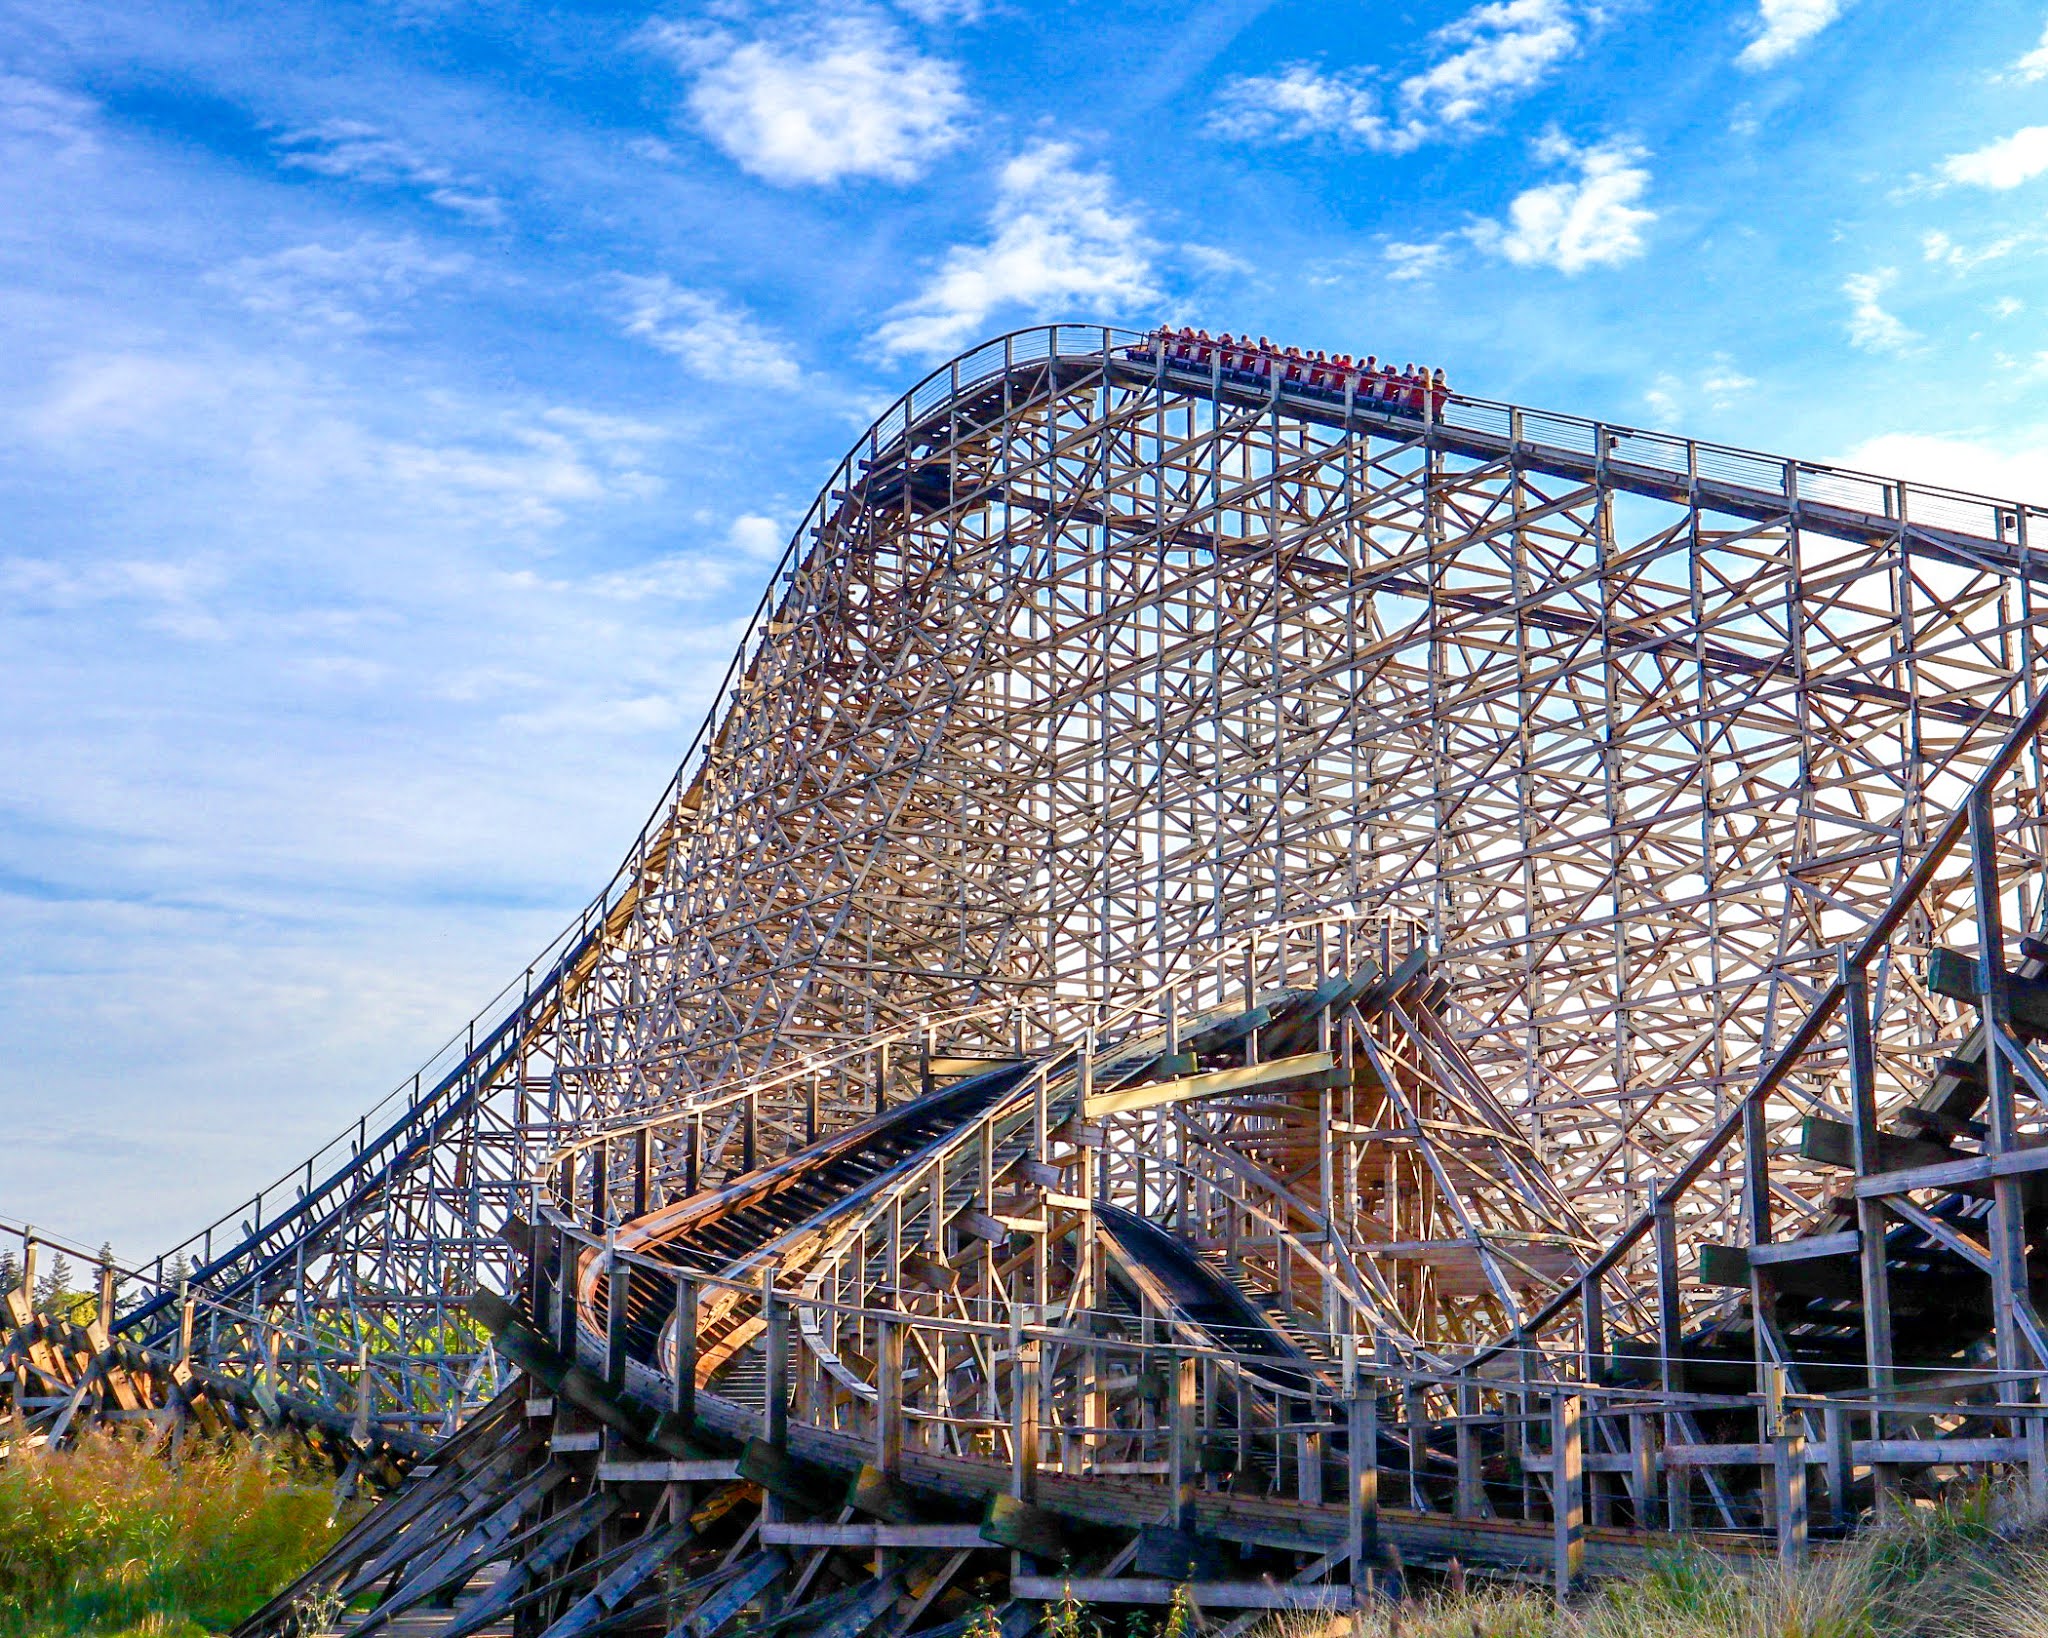 Why Do We Love Wooden Coasters?